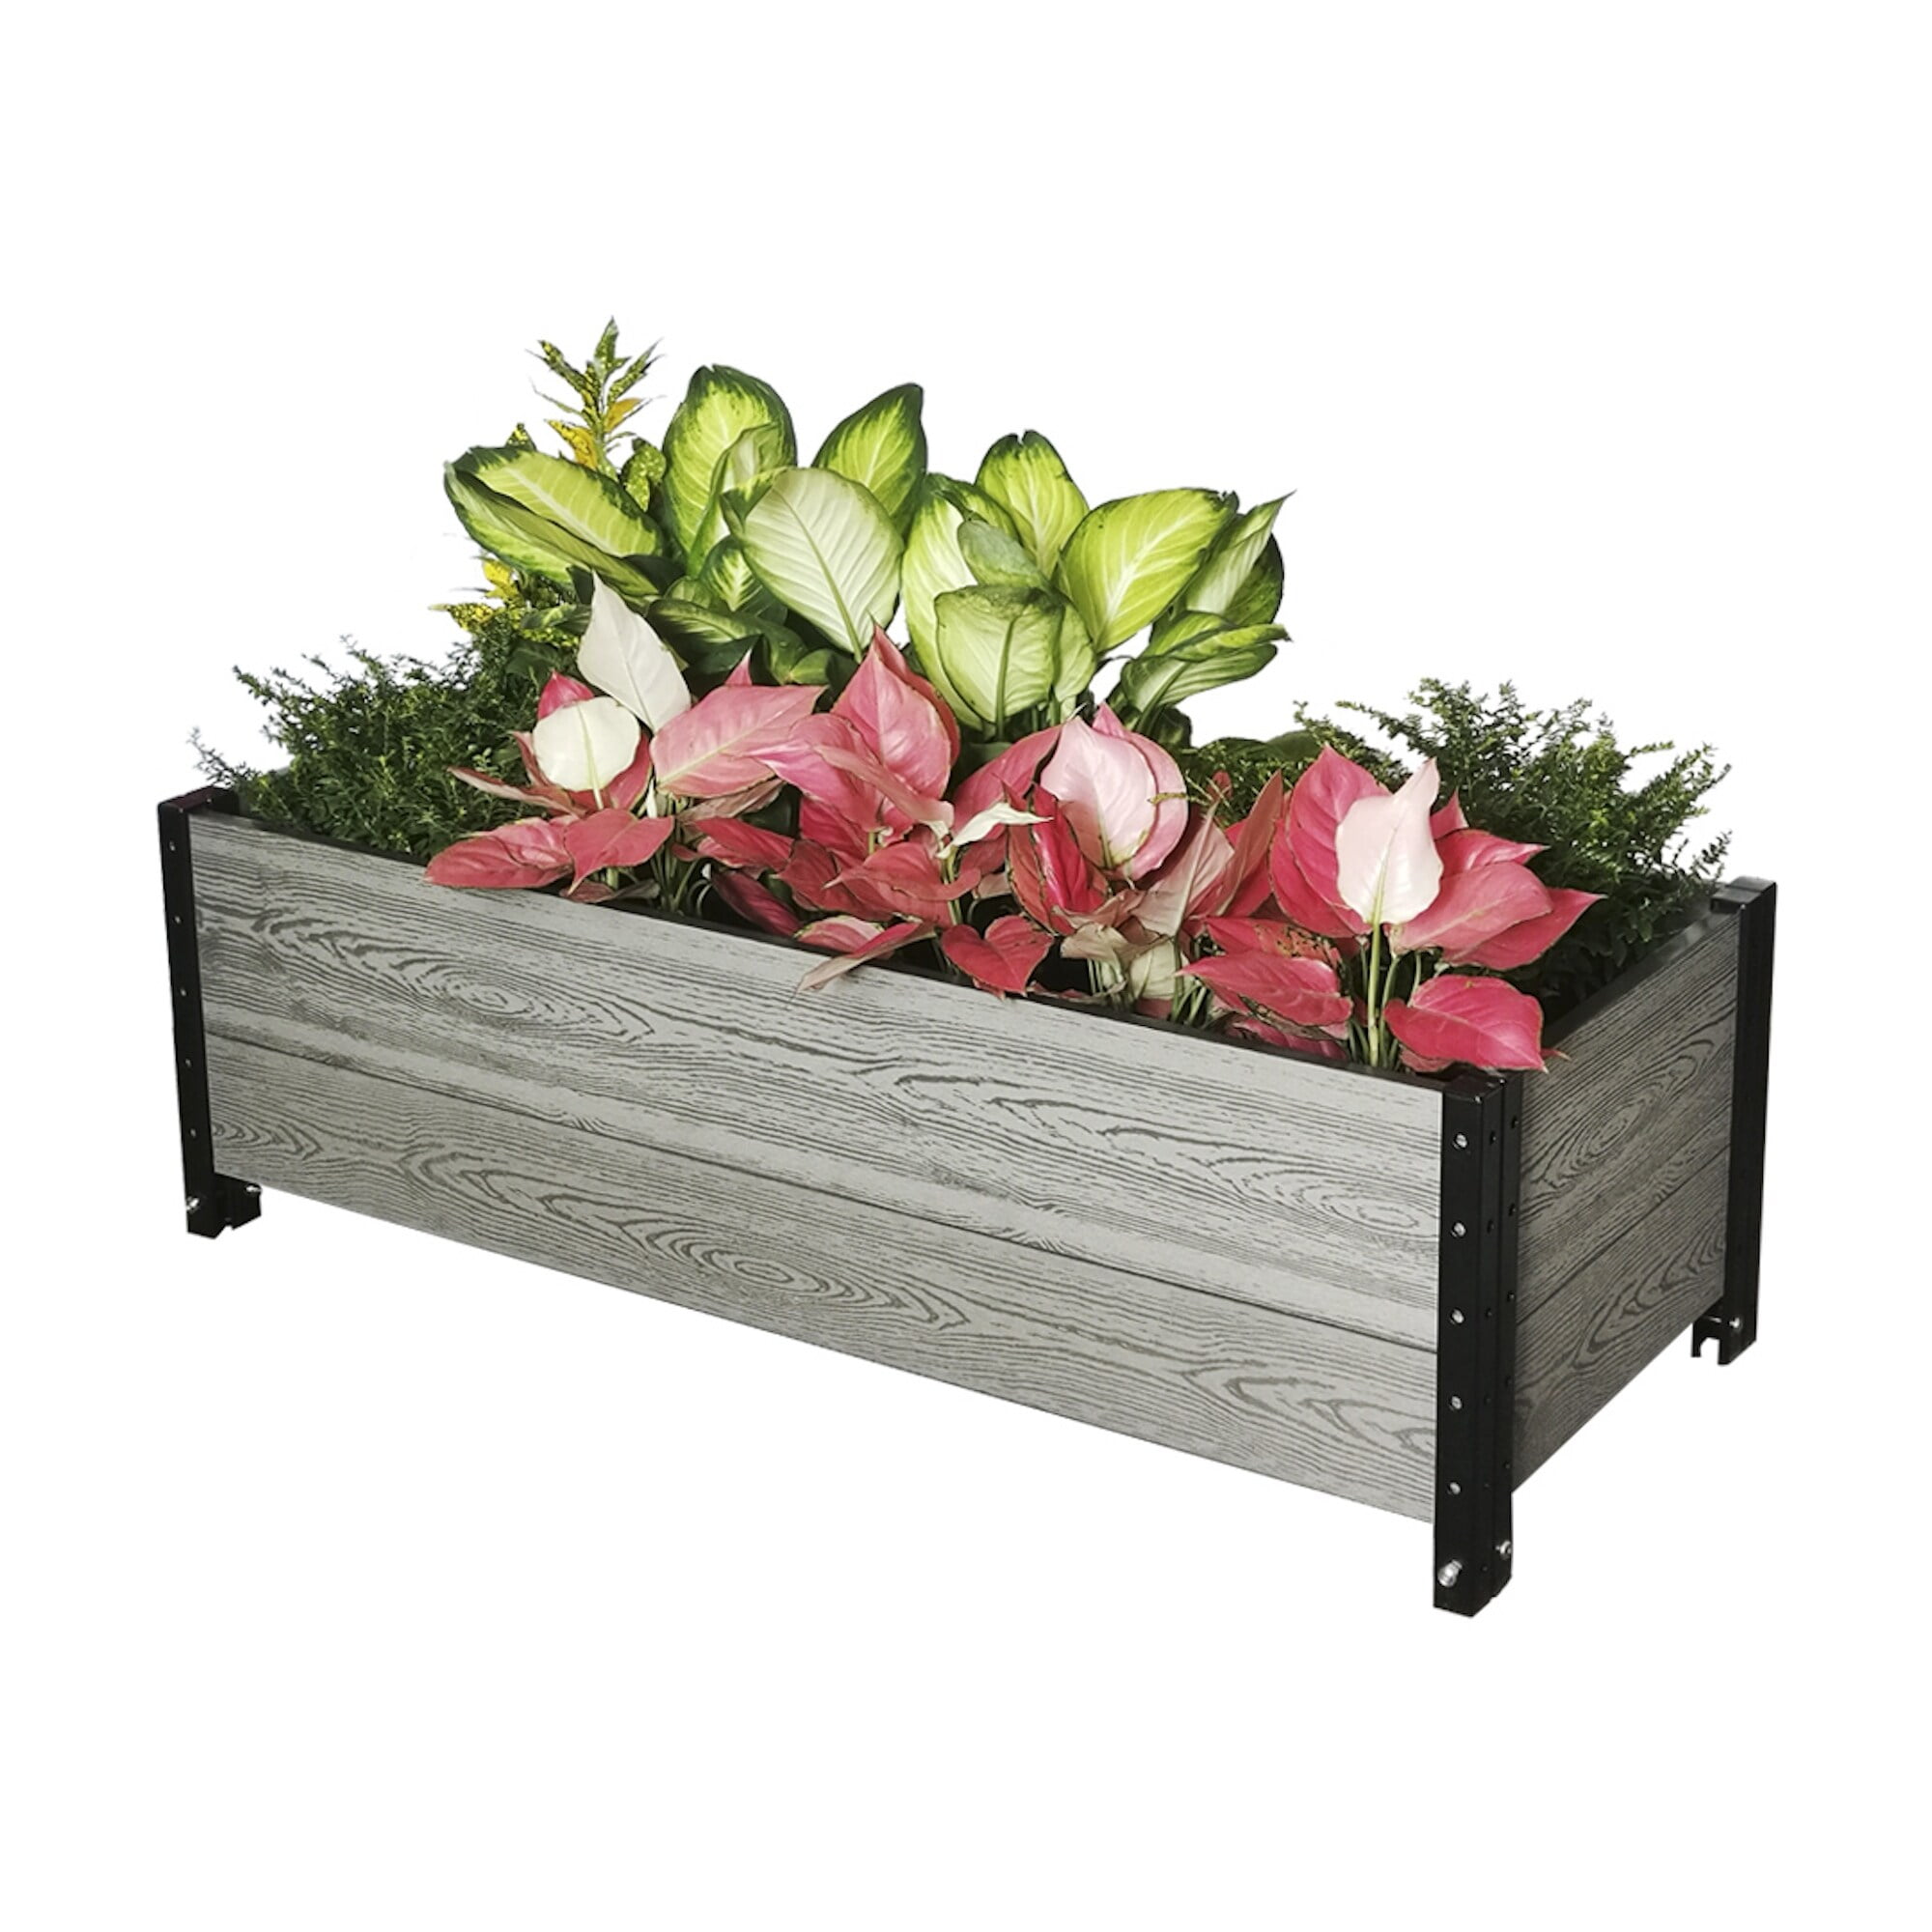 Picture of Everbloom E144519G 45 x 19 x 14 in. Deckside Planter Box in Grey